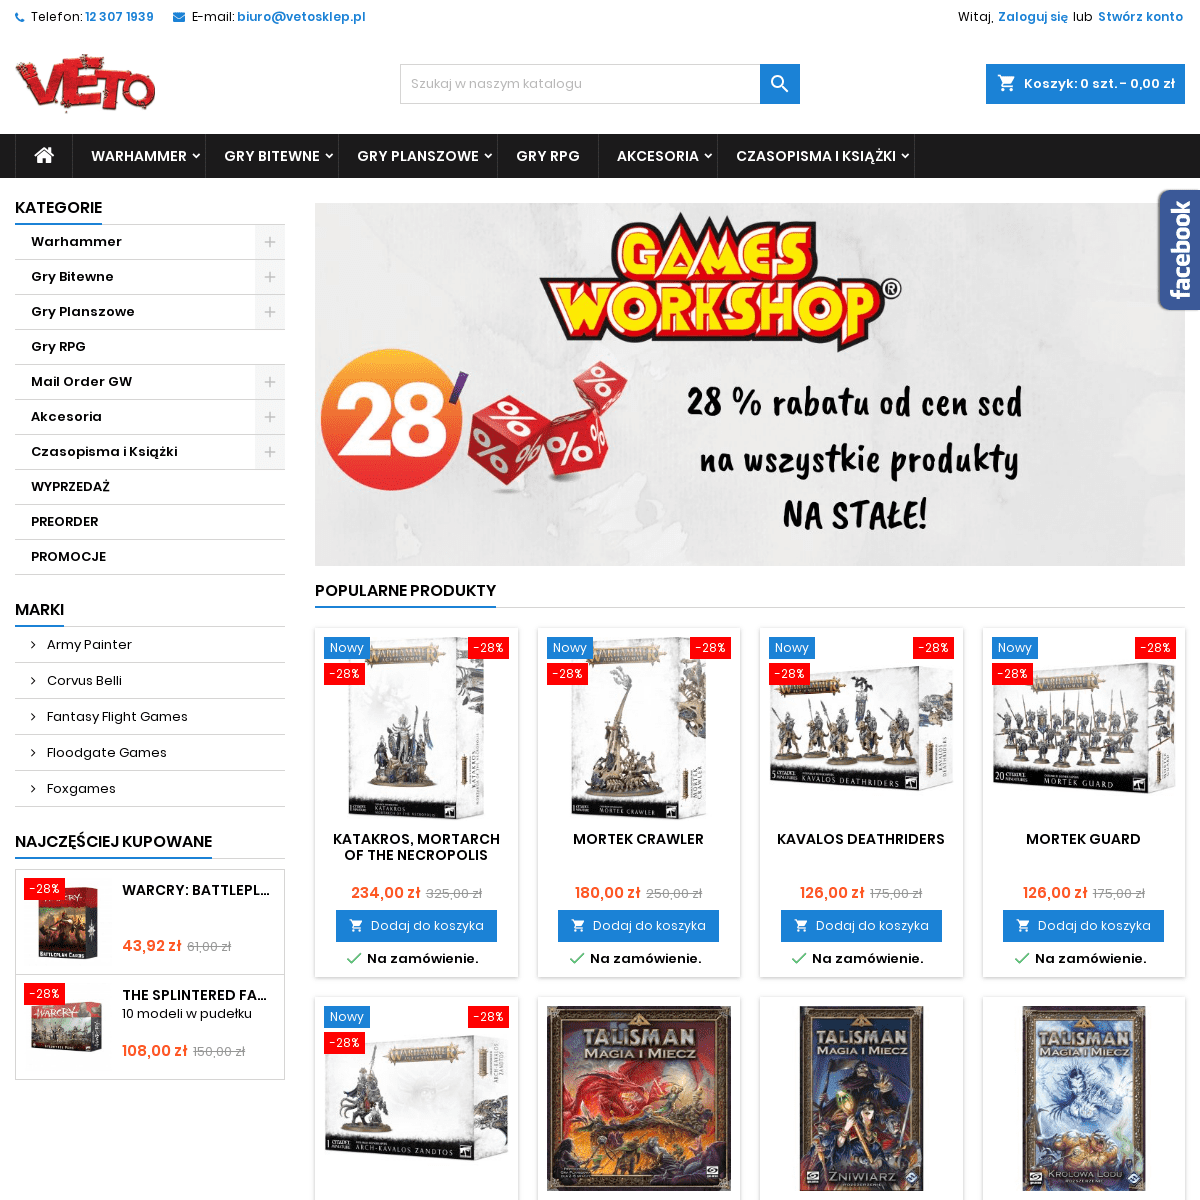 A complete backup of veto-store.pl